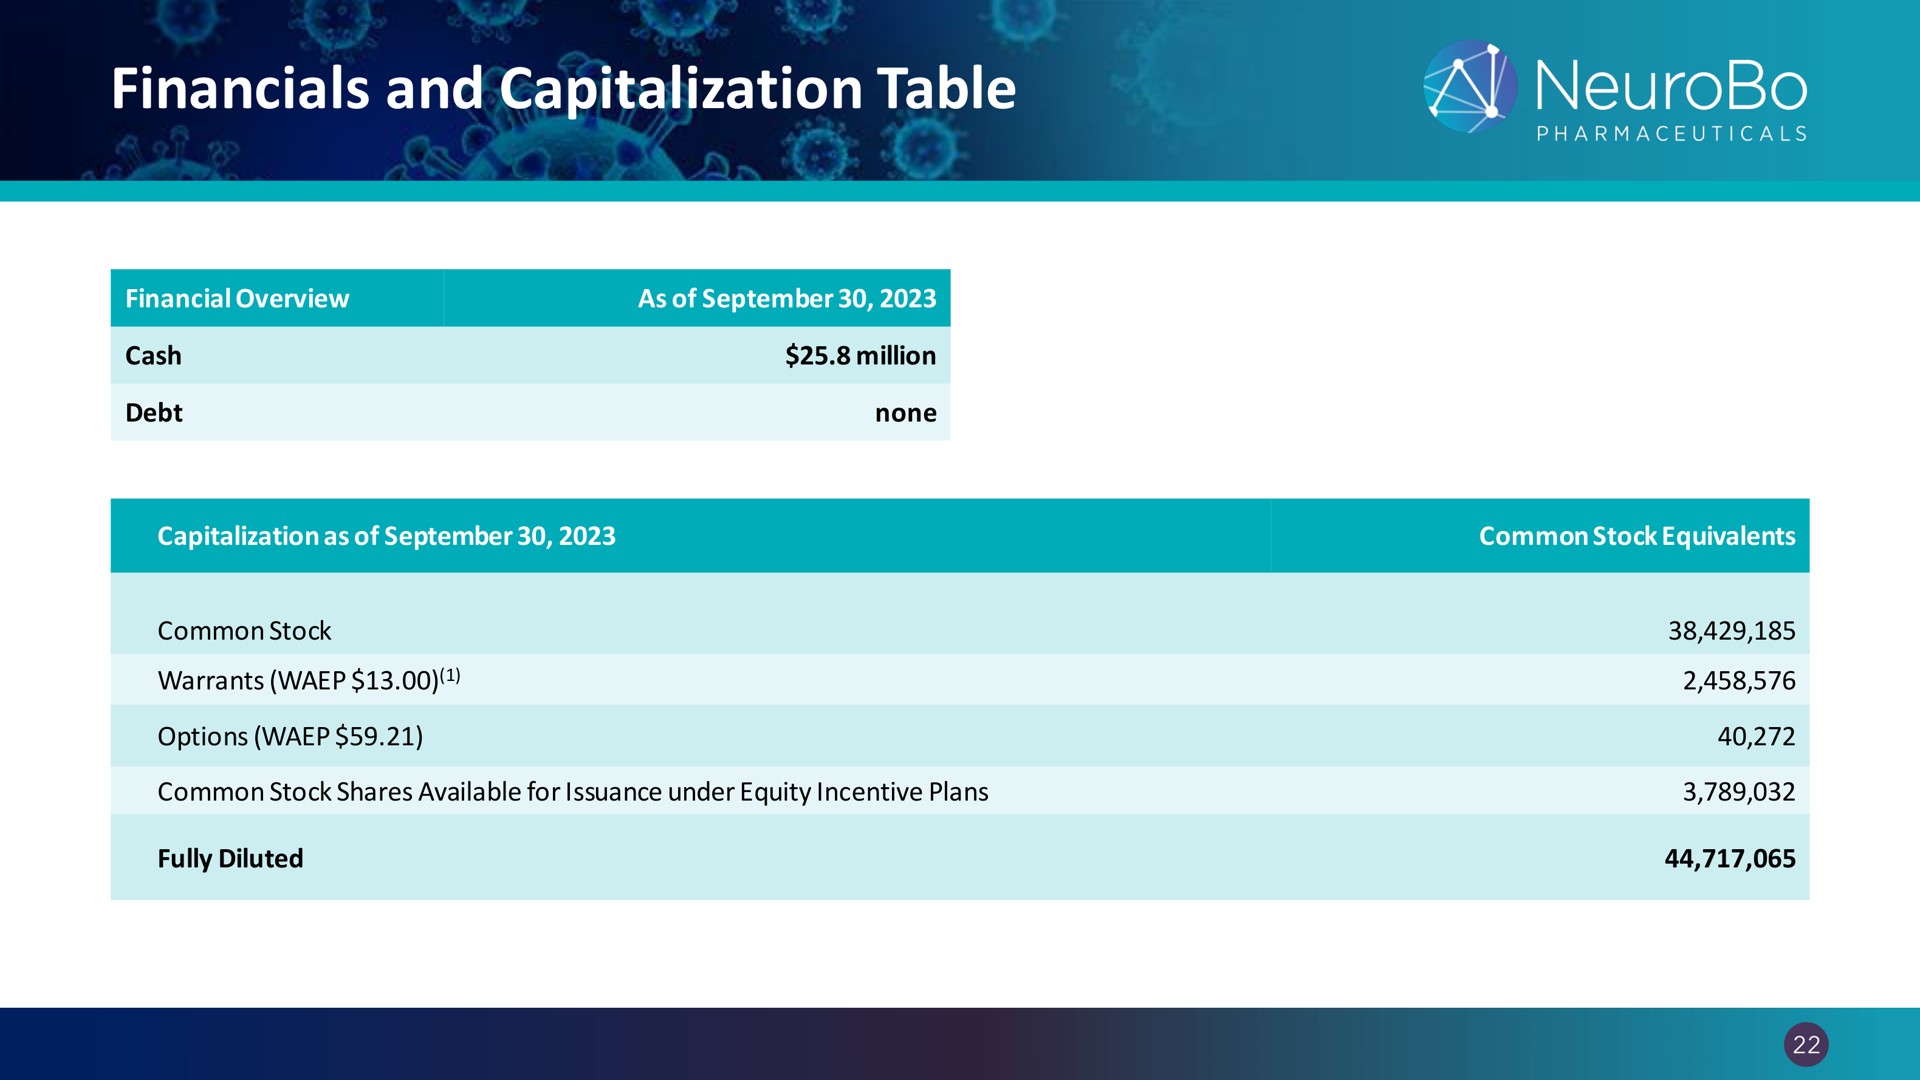 and capitalization table | NeuroBo Pharmaceuticals